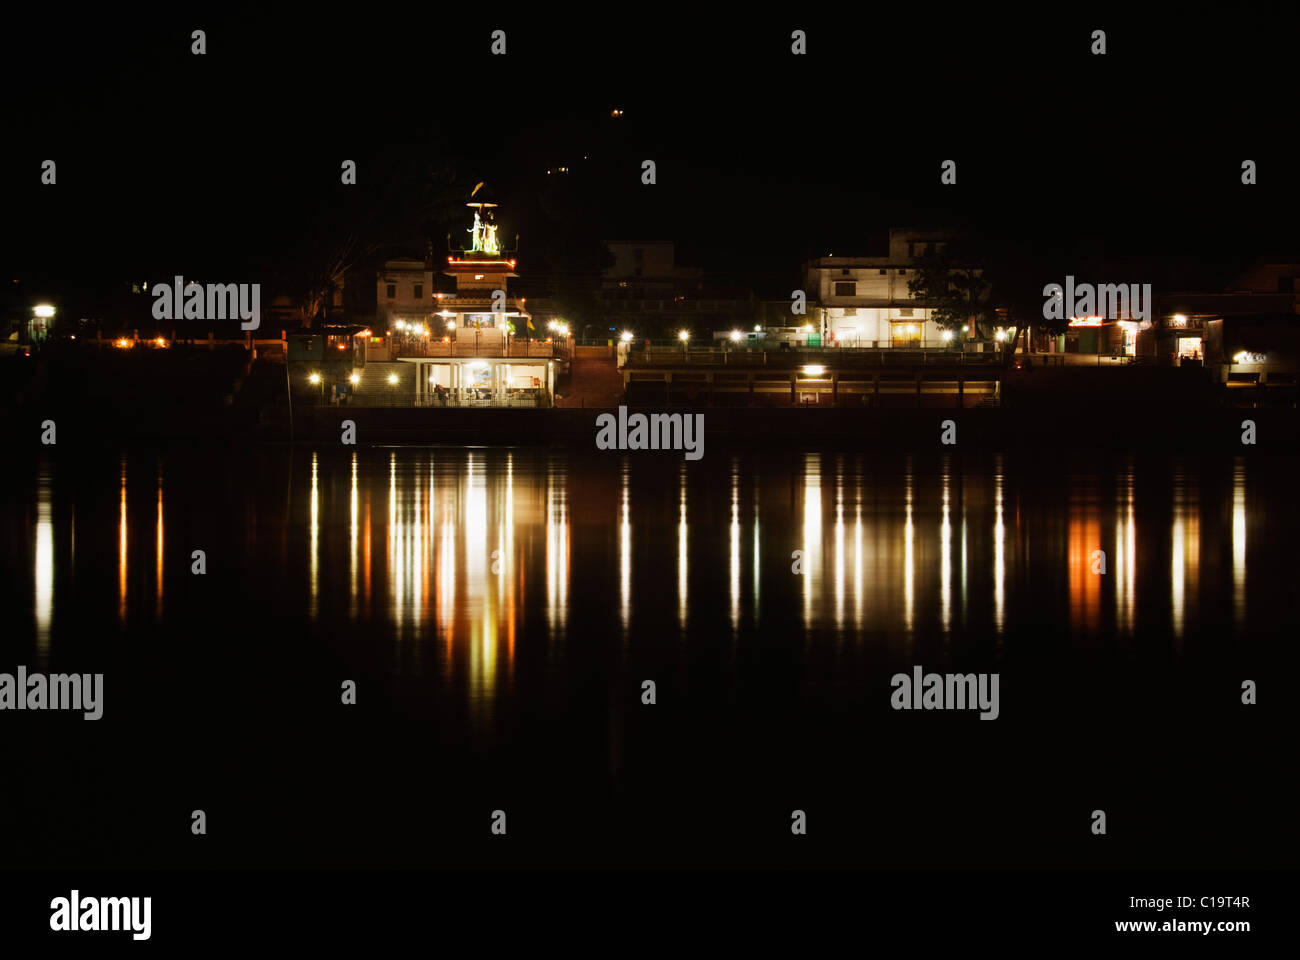 Reflection of buildings in water, Ganges River, Rishikesh, Uttarakhand, India Stock Photo